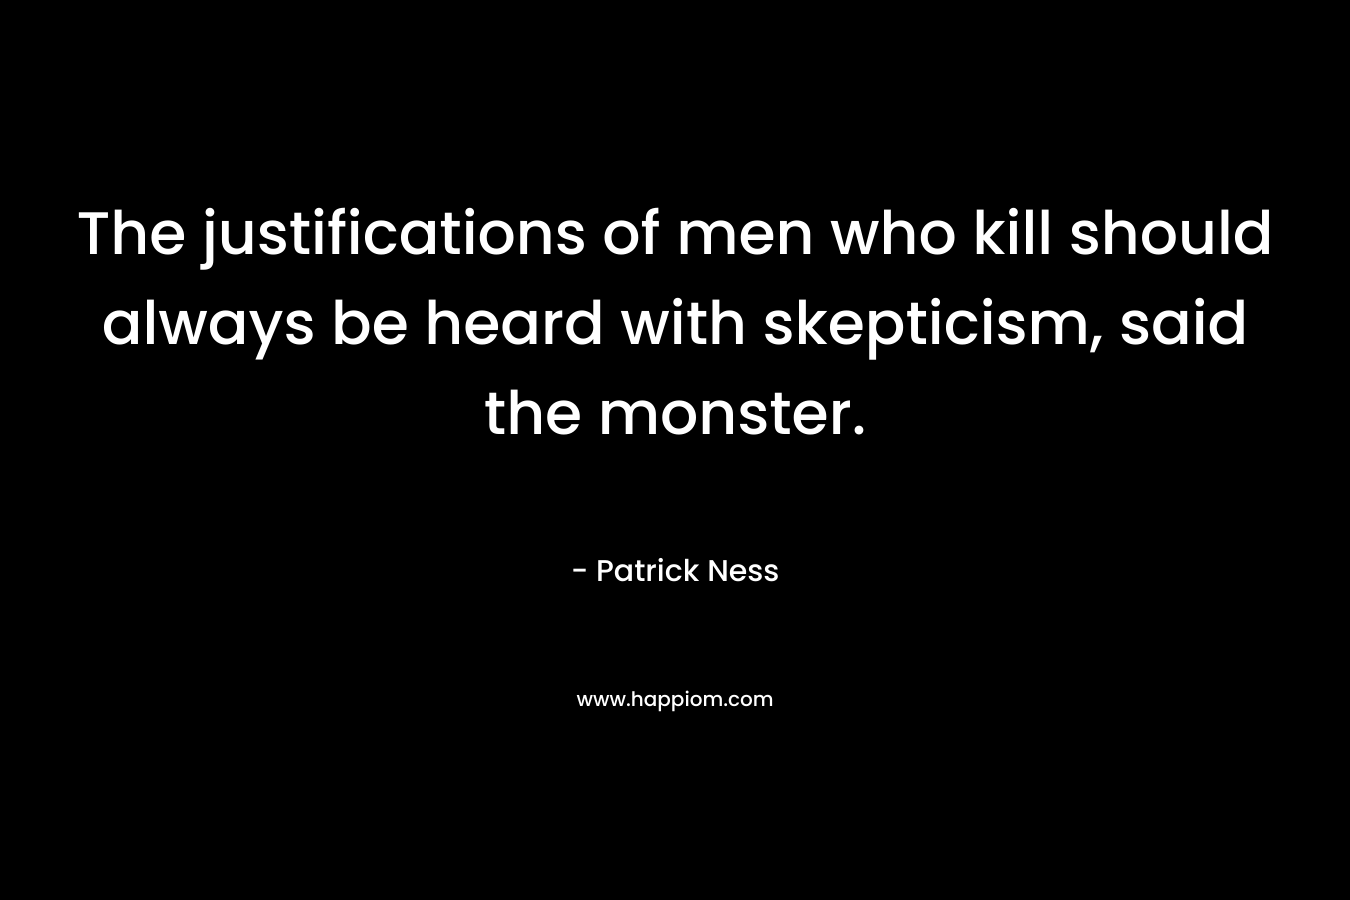 The justifications of men who kill should always be heard with skepticism, said the monster. – Patrick Ness